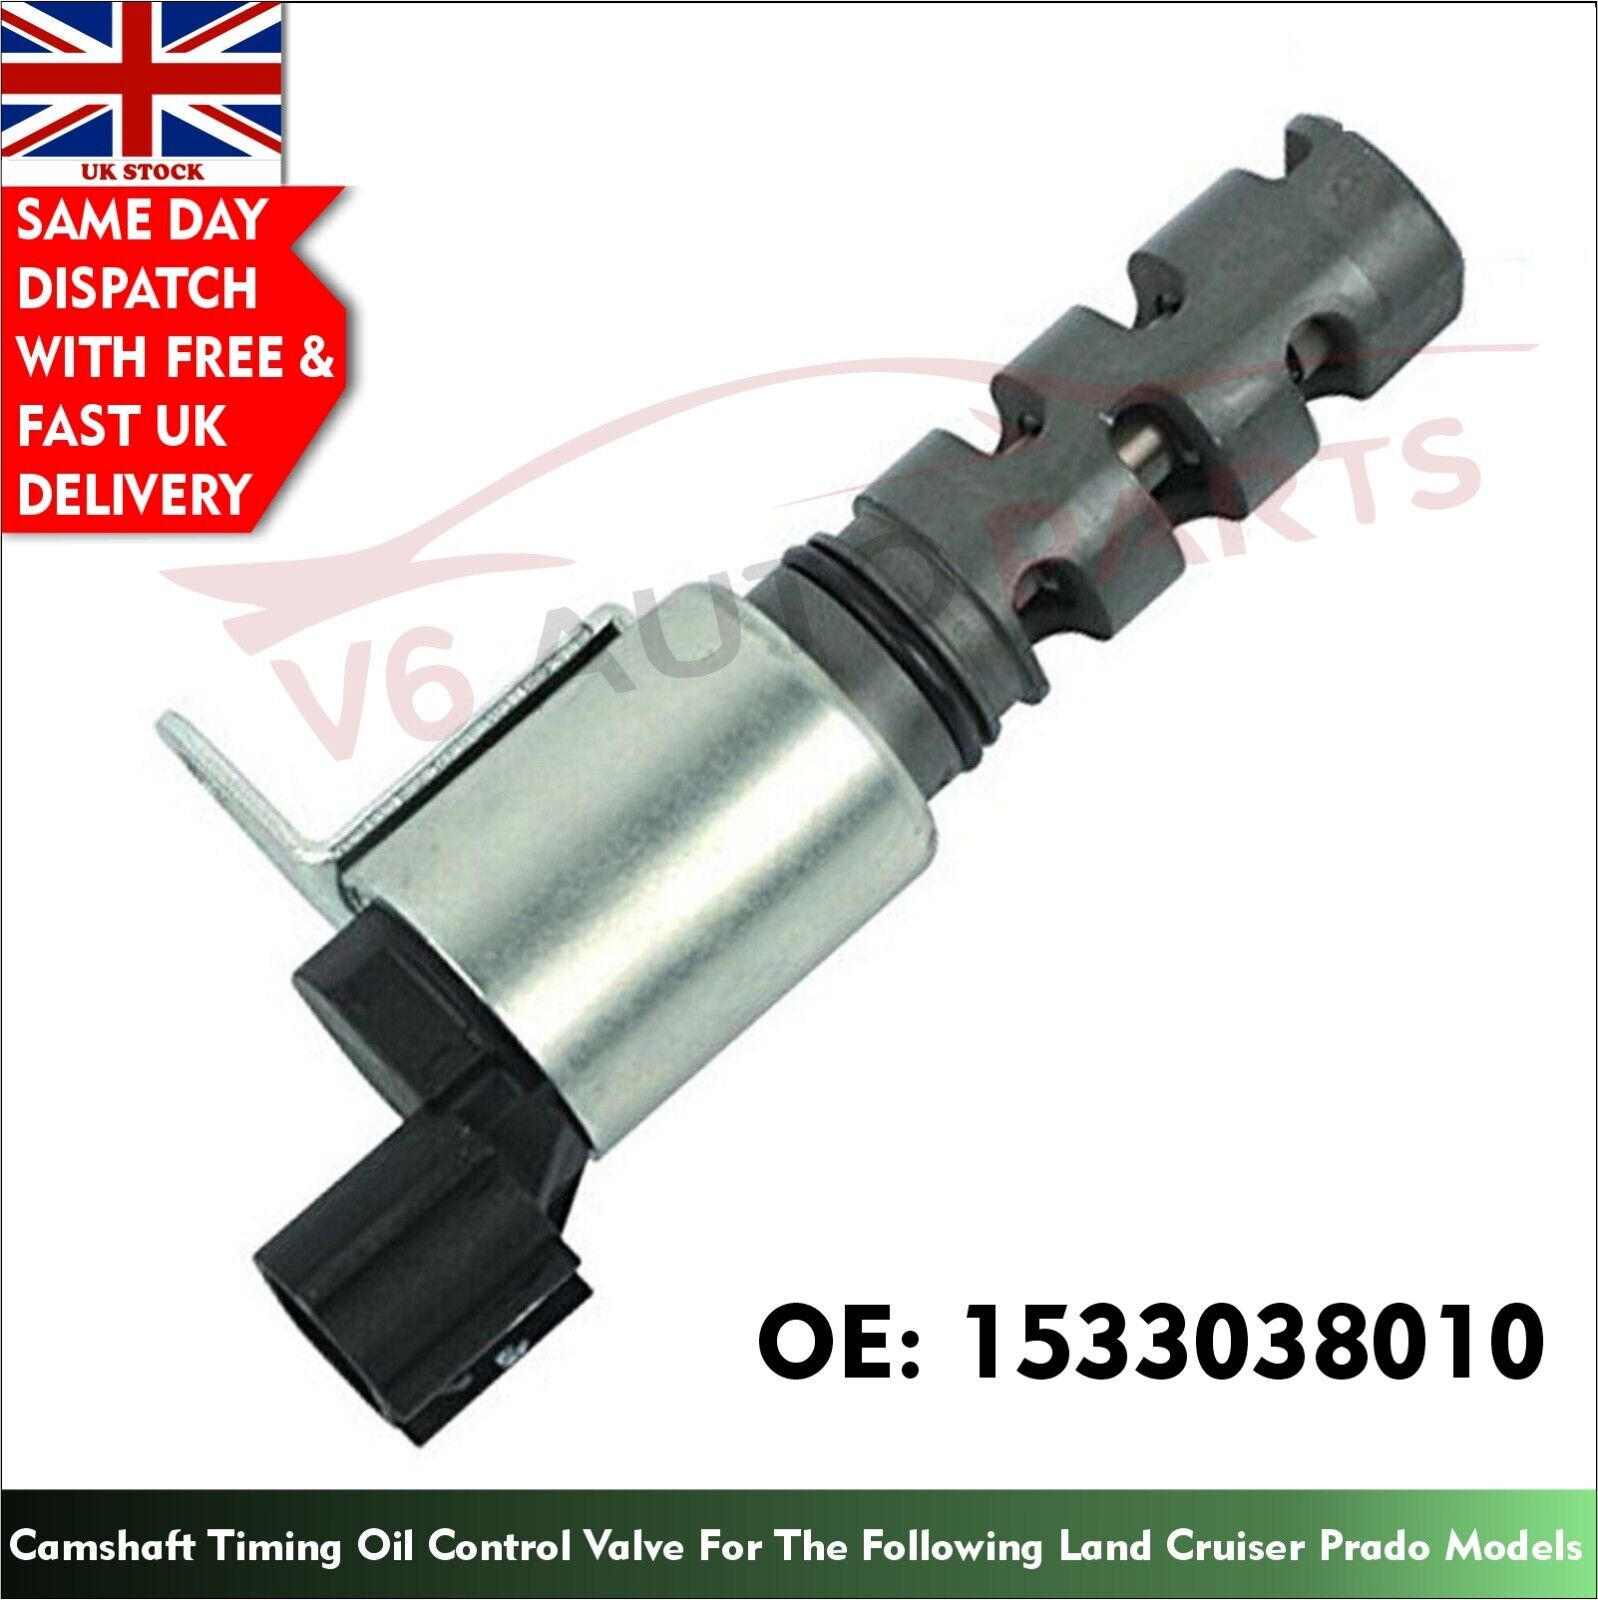 Camshaft Timing Oil Control Valve For The Following 2009 - 2013 MAJESTA Models